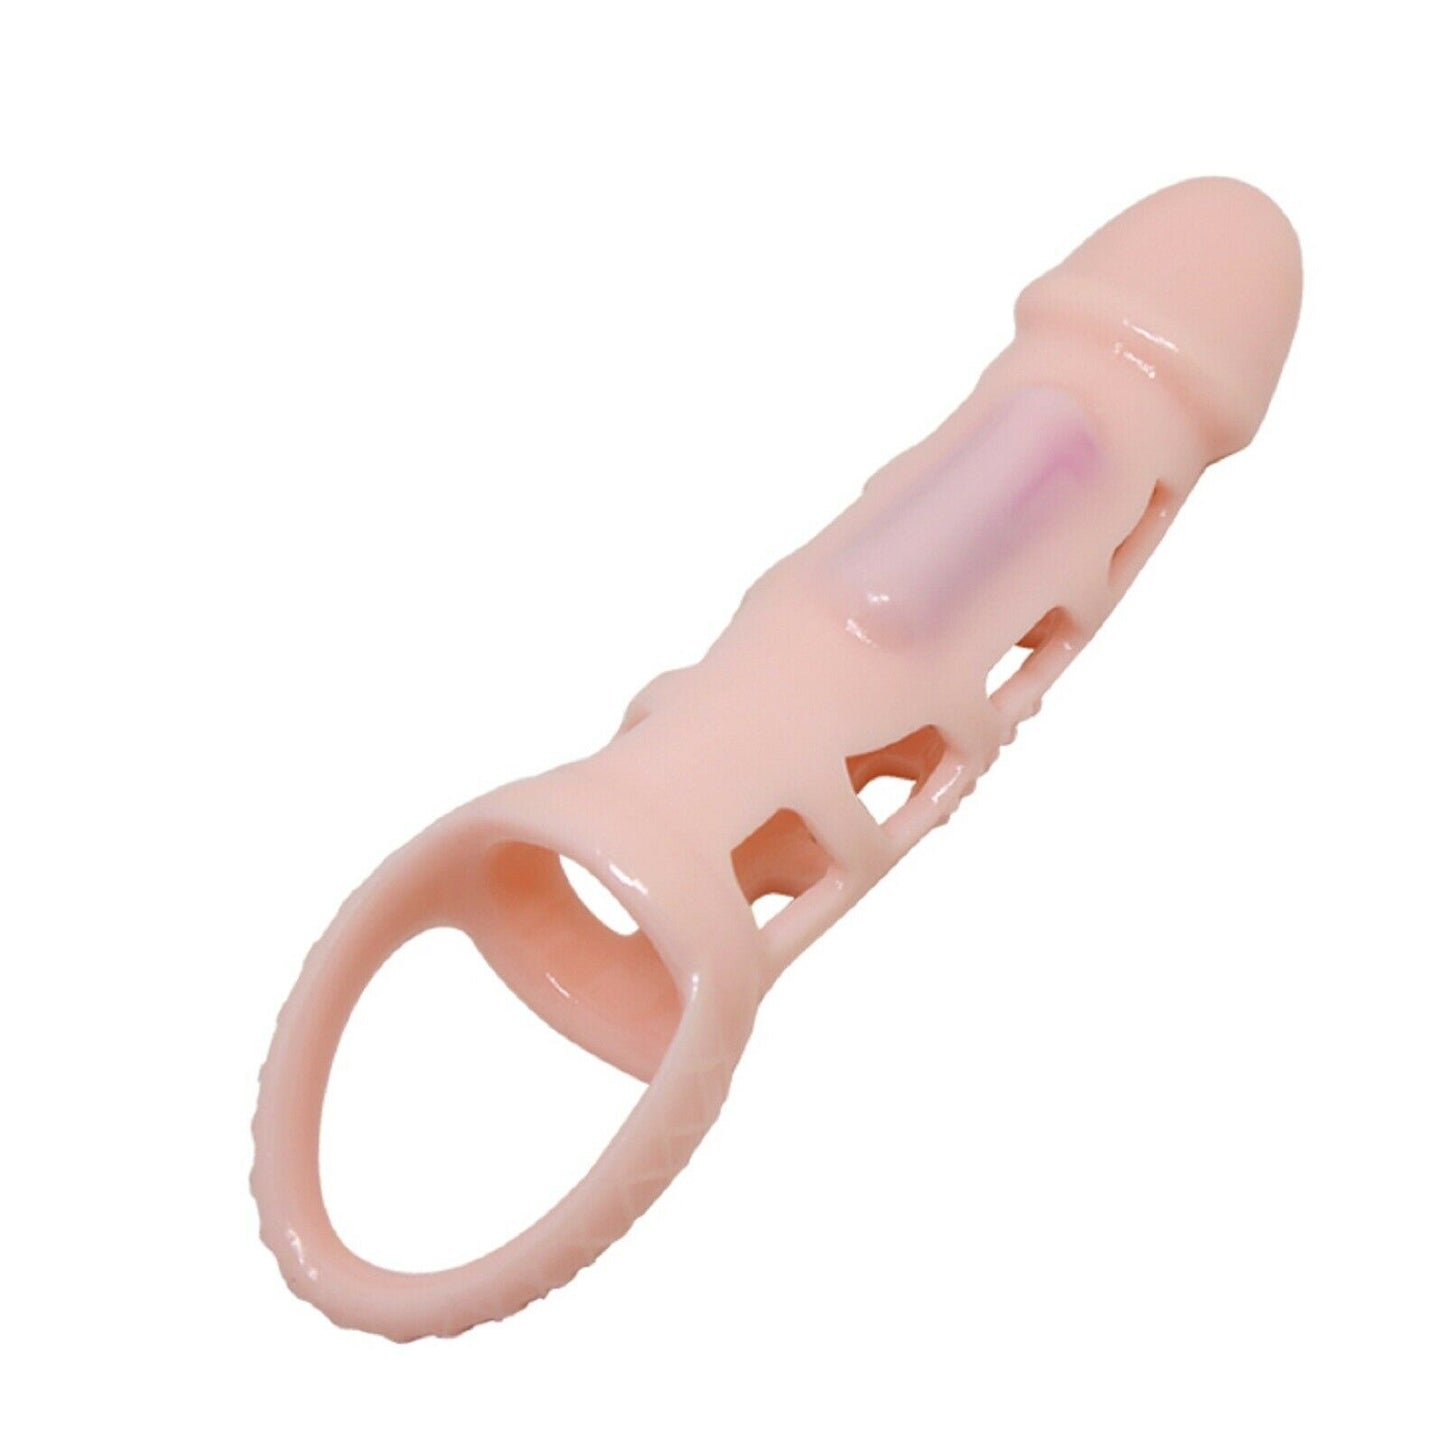 Vibrating Sleeve Penis Extender Cock Ring Delay Sleeve Extension Men Sex Toy New